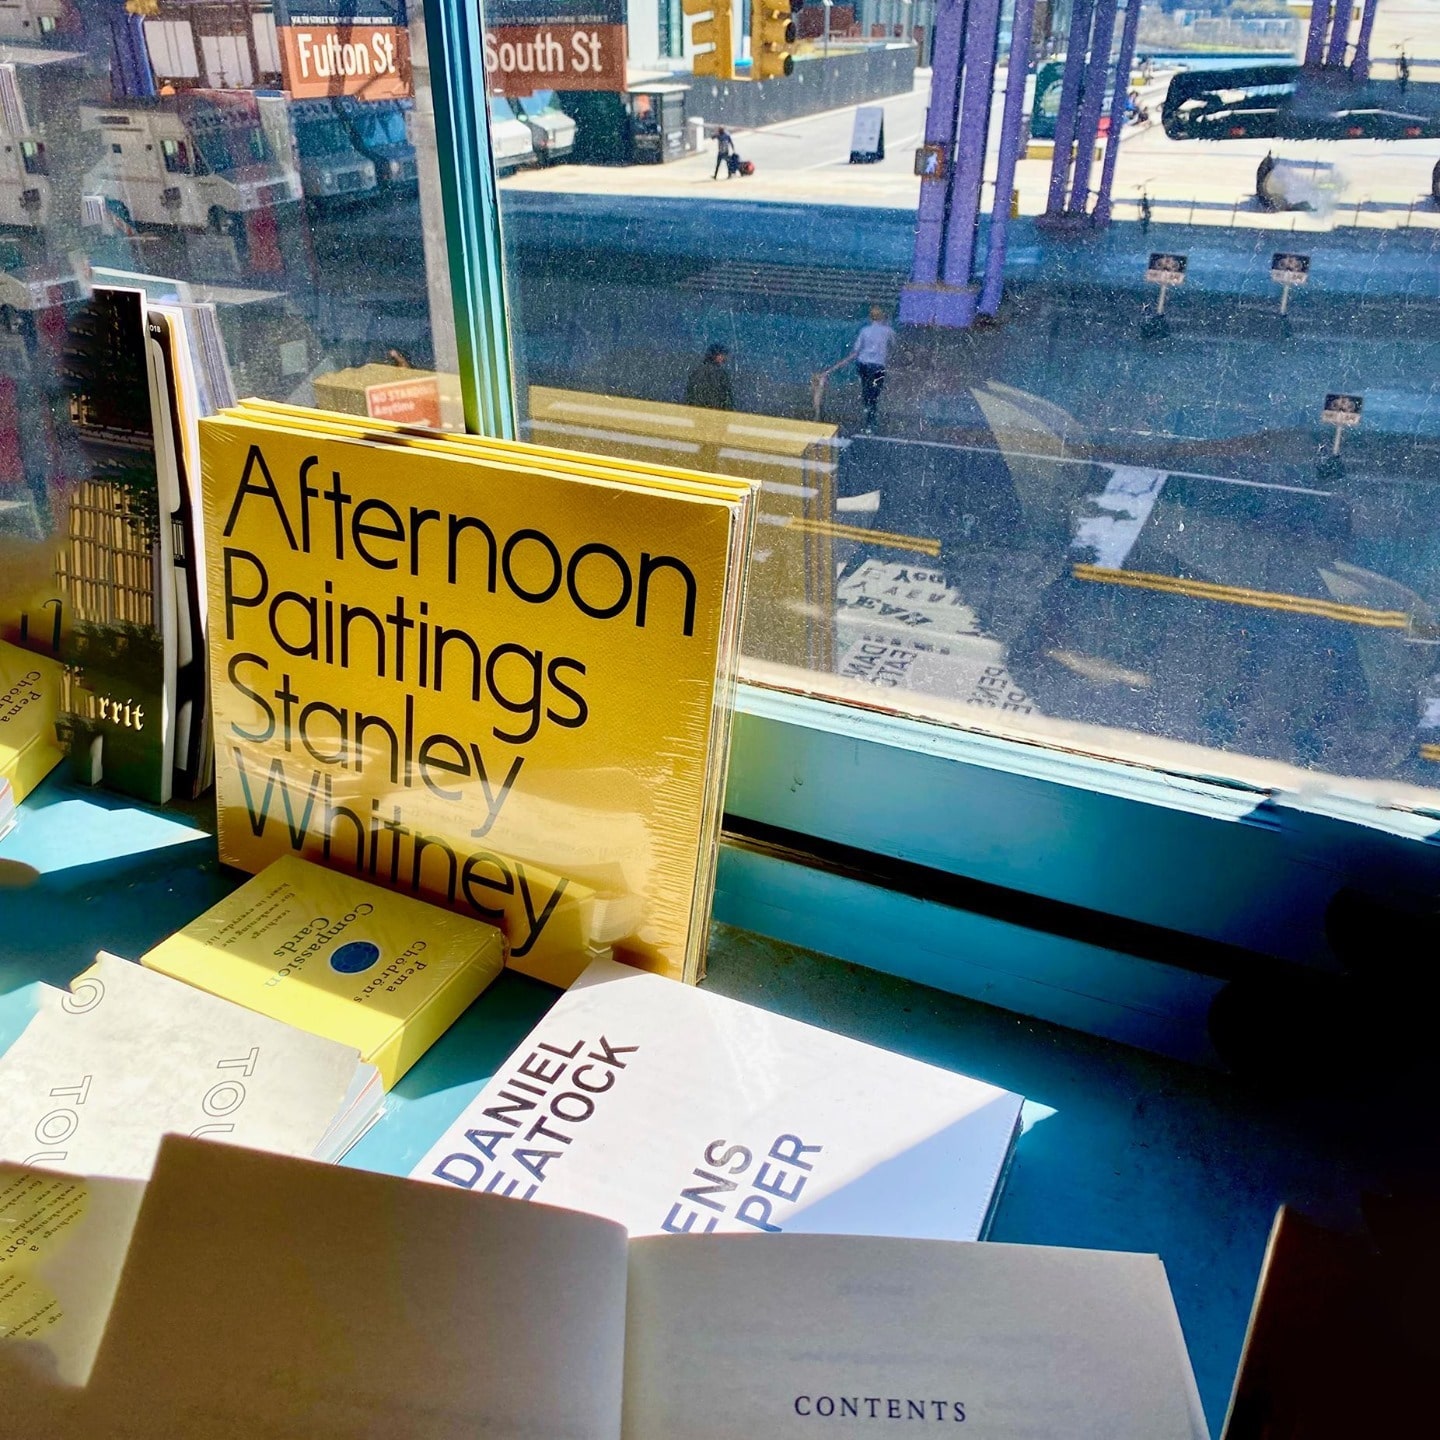 It’s #WorldBookDay and there’s no better way to celebrate than supporting local and visiting @mcnallyjackson in the Seaport! What are you currently reading?